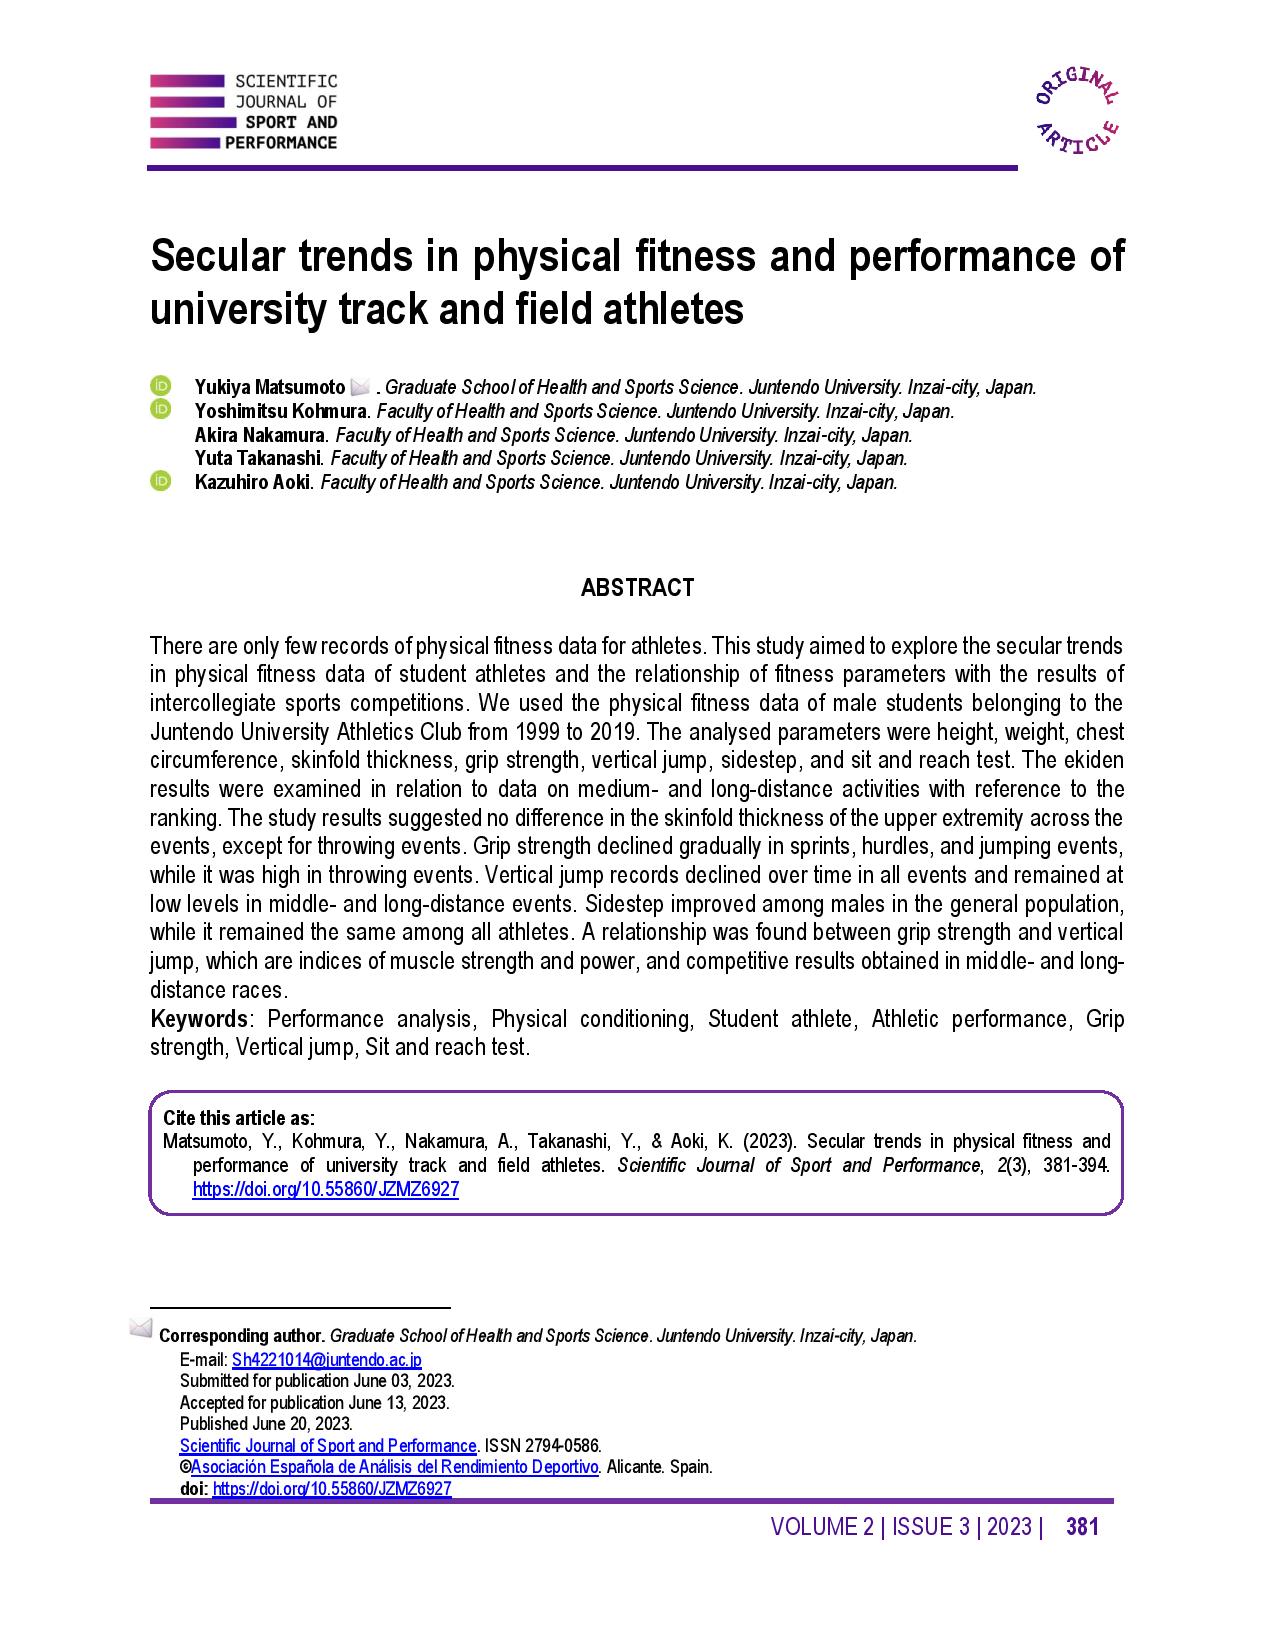 Secular trends in physical fitness and performance of university track and field athletes